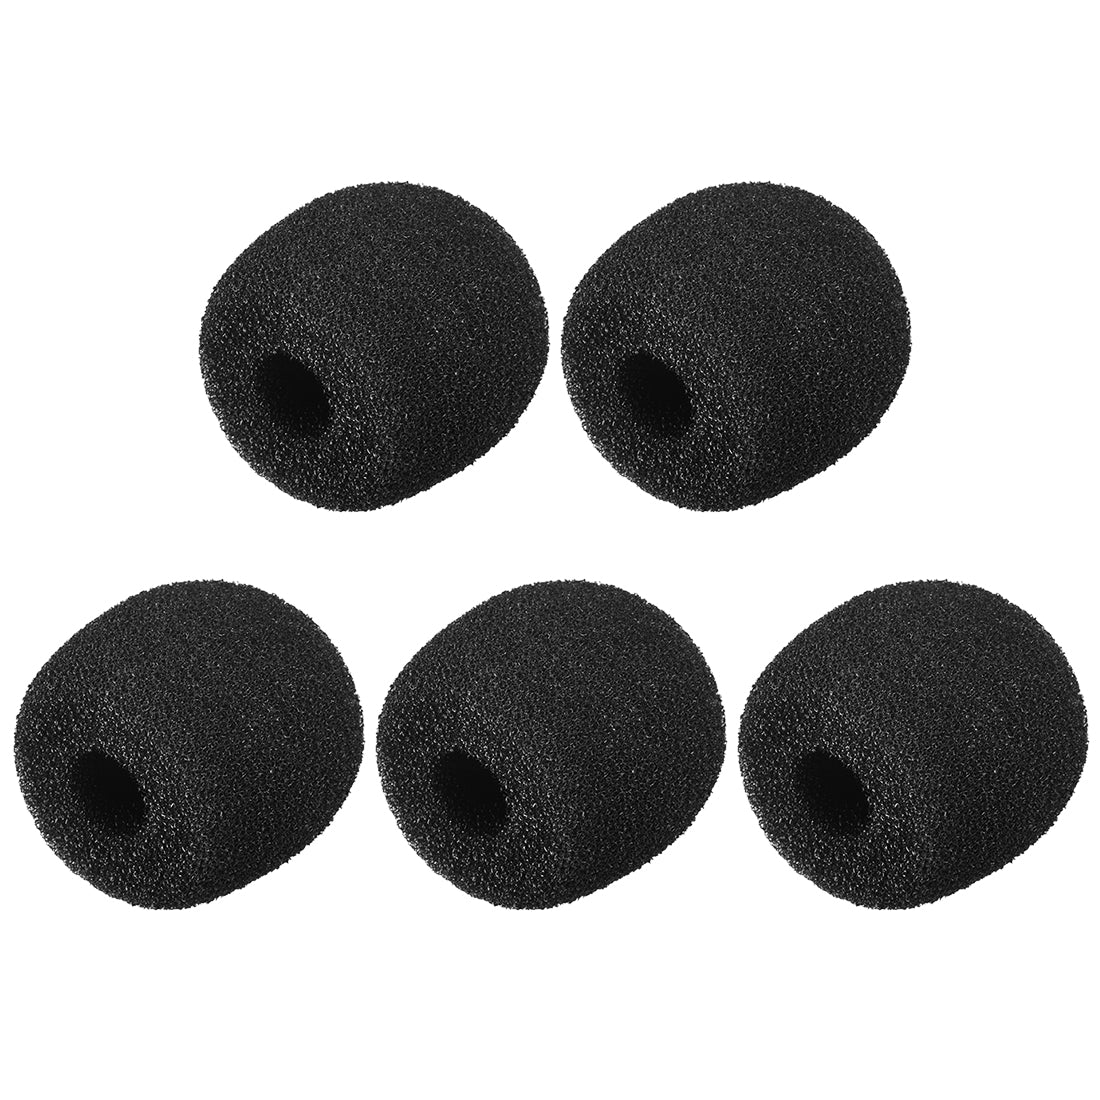 uxcell Uxcell 5PCS Foam Mic Cover Headset Microphone Windscreen Shield Protection 26mm Length for Headset Lapel Lavalier